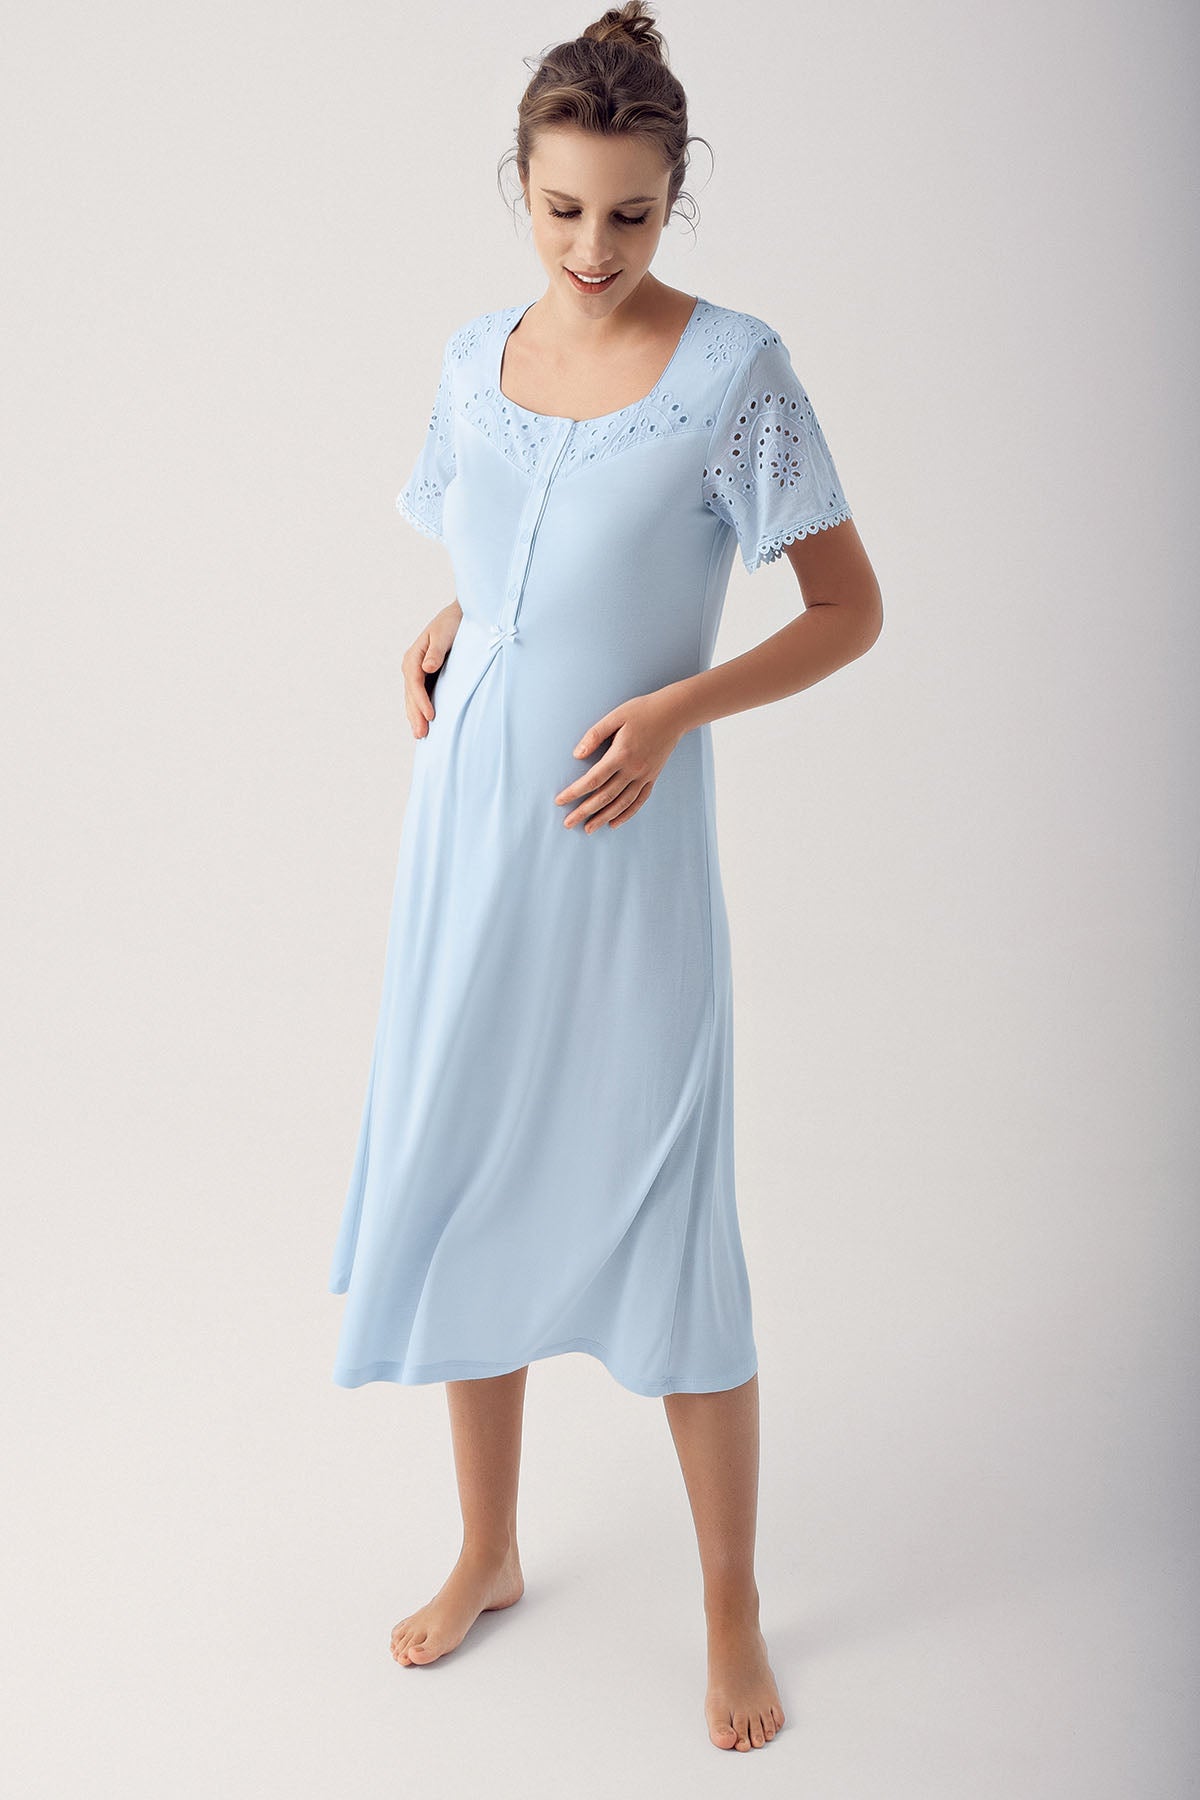 Shopymommy 14400 Motif Embroidered Maternity & Nursing Nightgown With Robe Blue